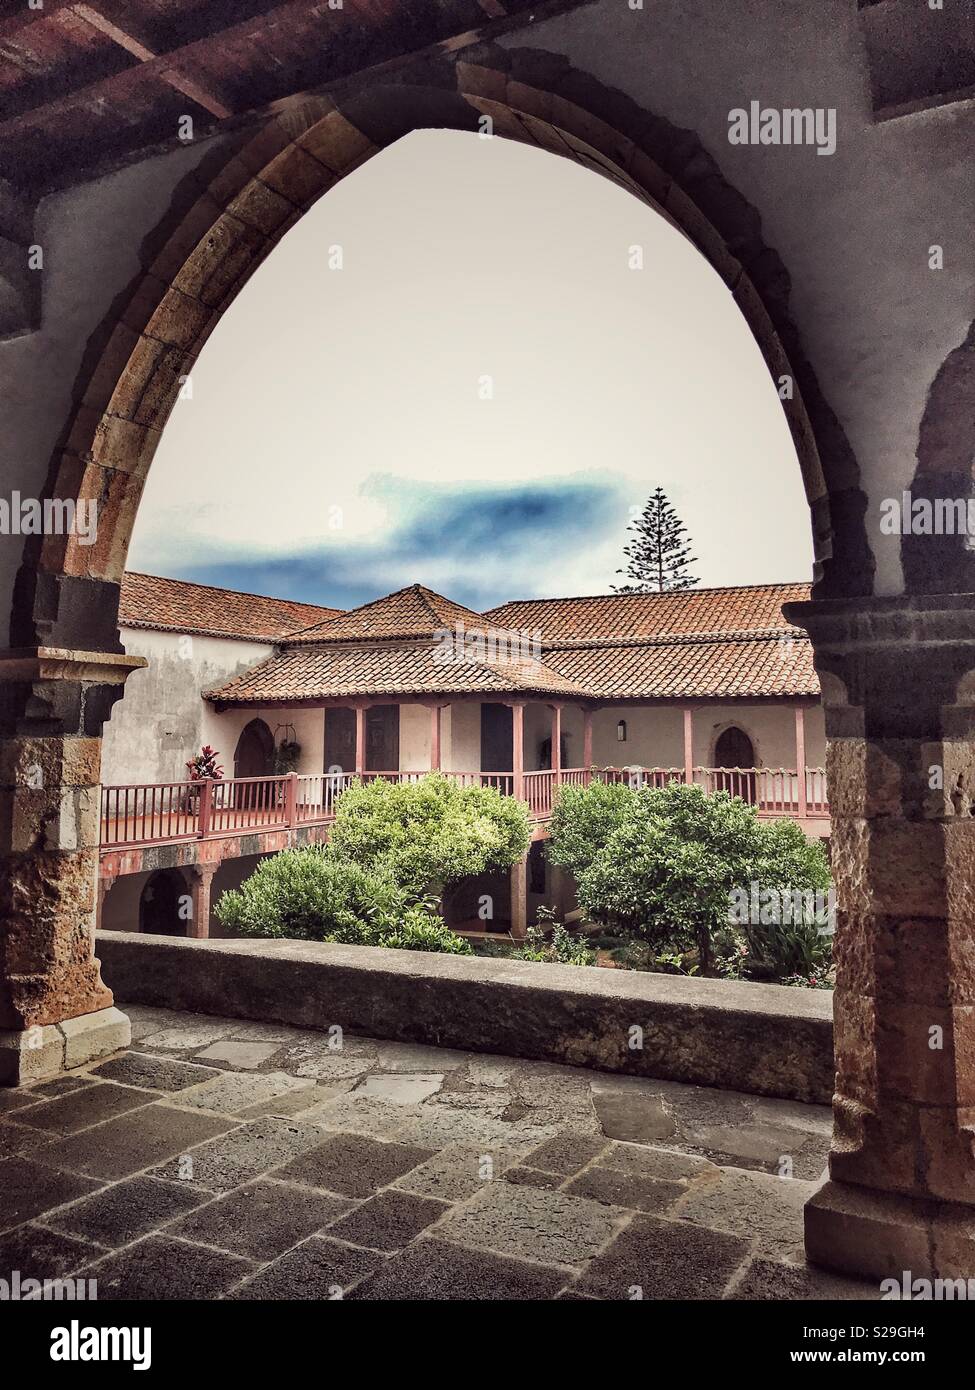 Santa Clara Convent, built for Franciscan Sisters in the 16th Century and still in use today, Funchal, Madeira, Portugal. Courtyard view through cloister arch Stock Photo